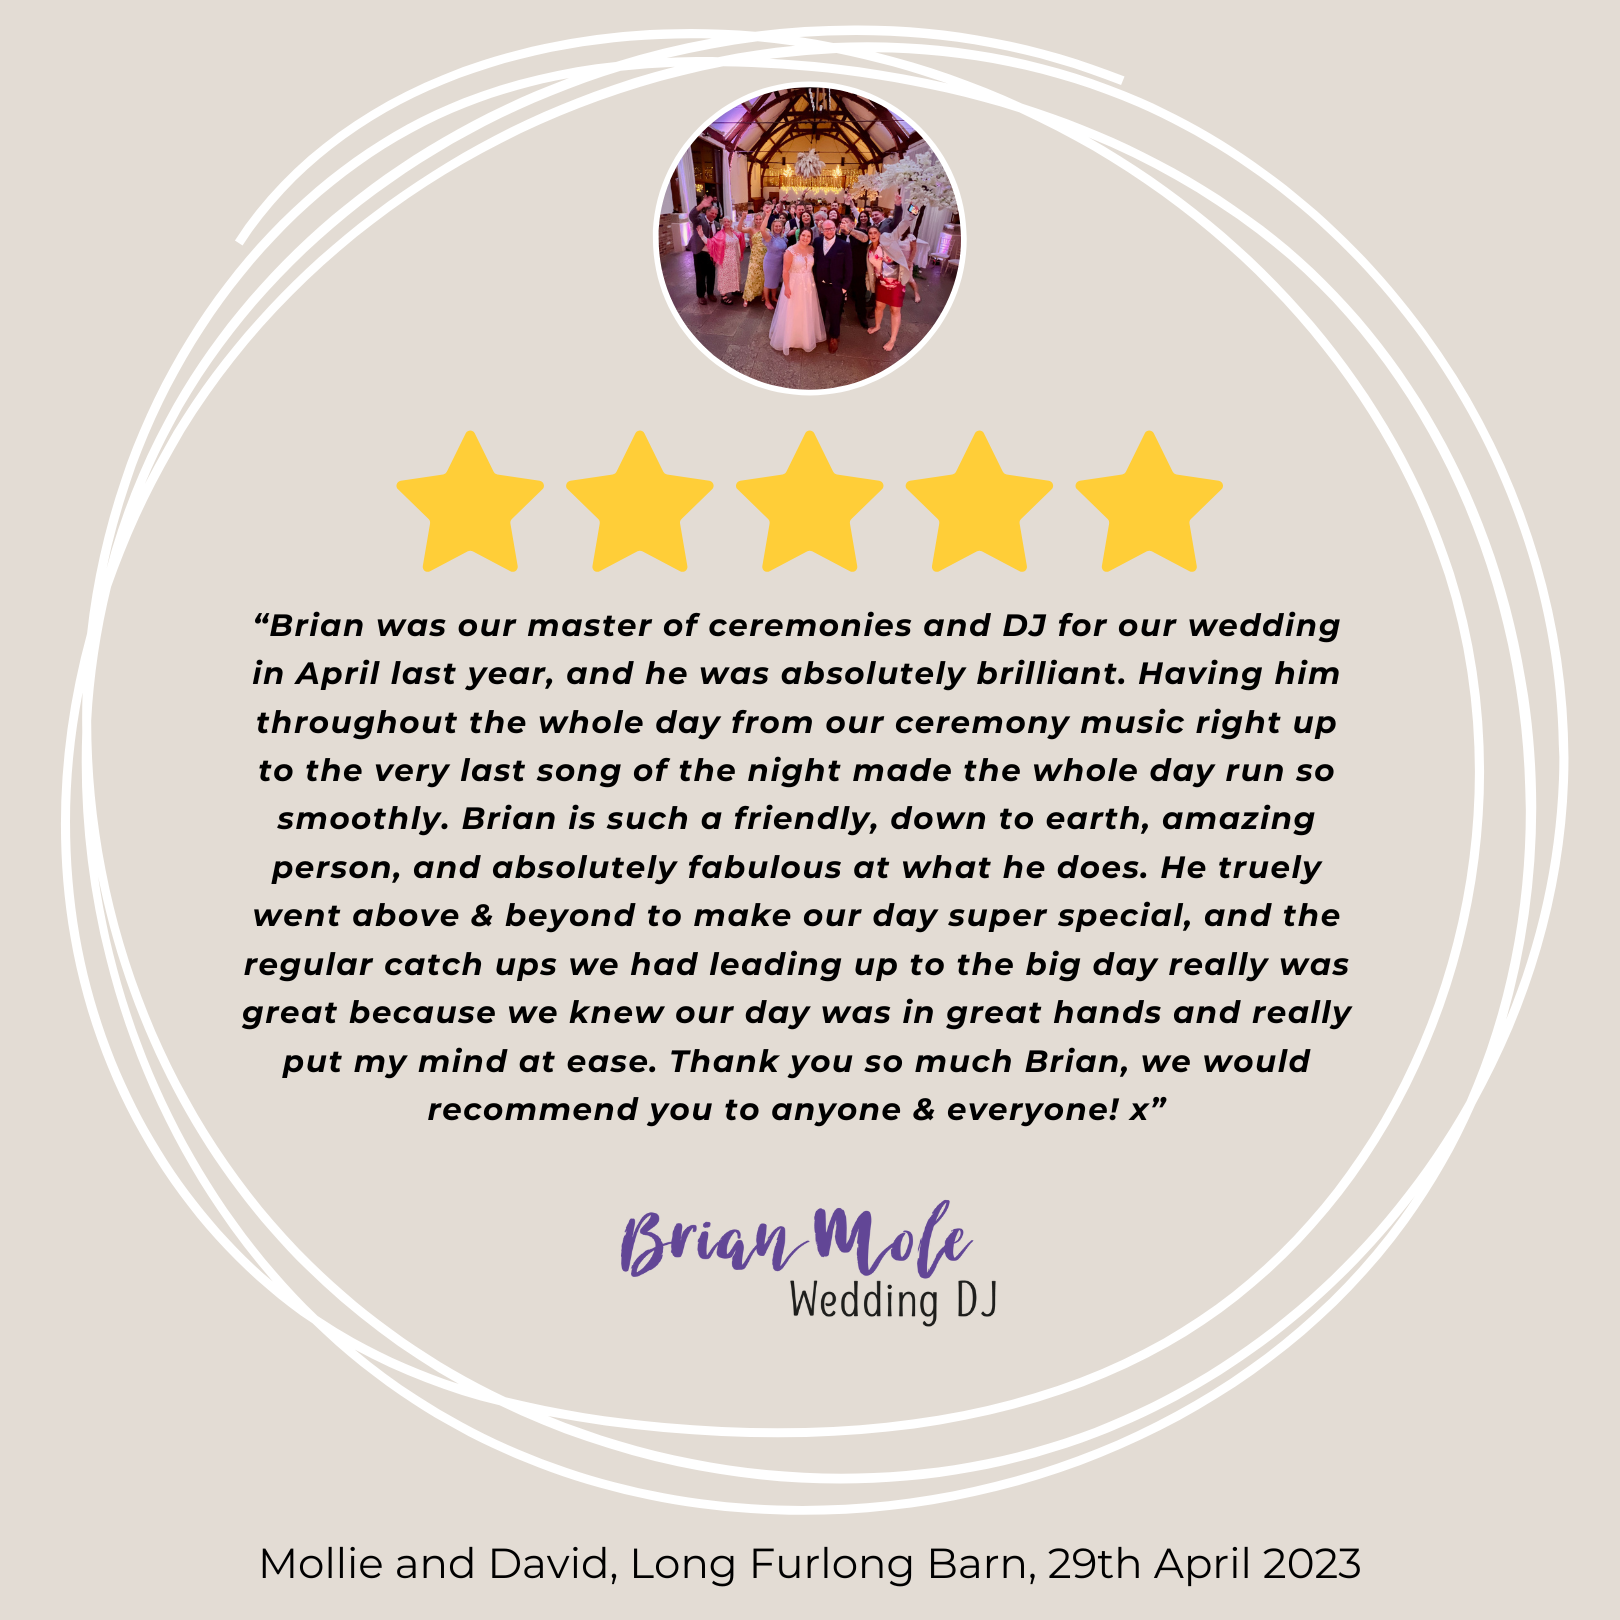 Google review left by Mollie and David a year after their fab wedding.